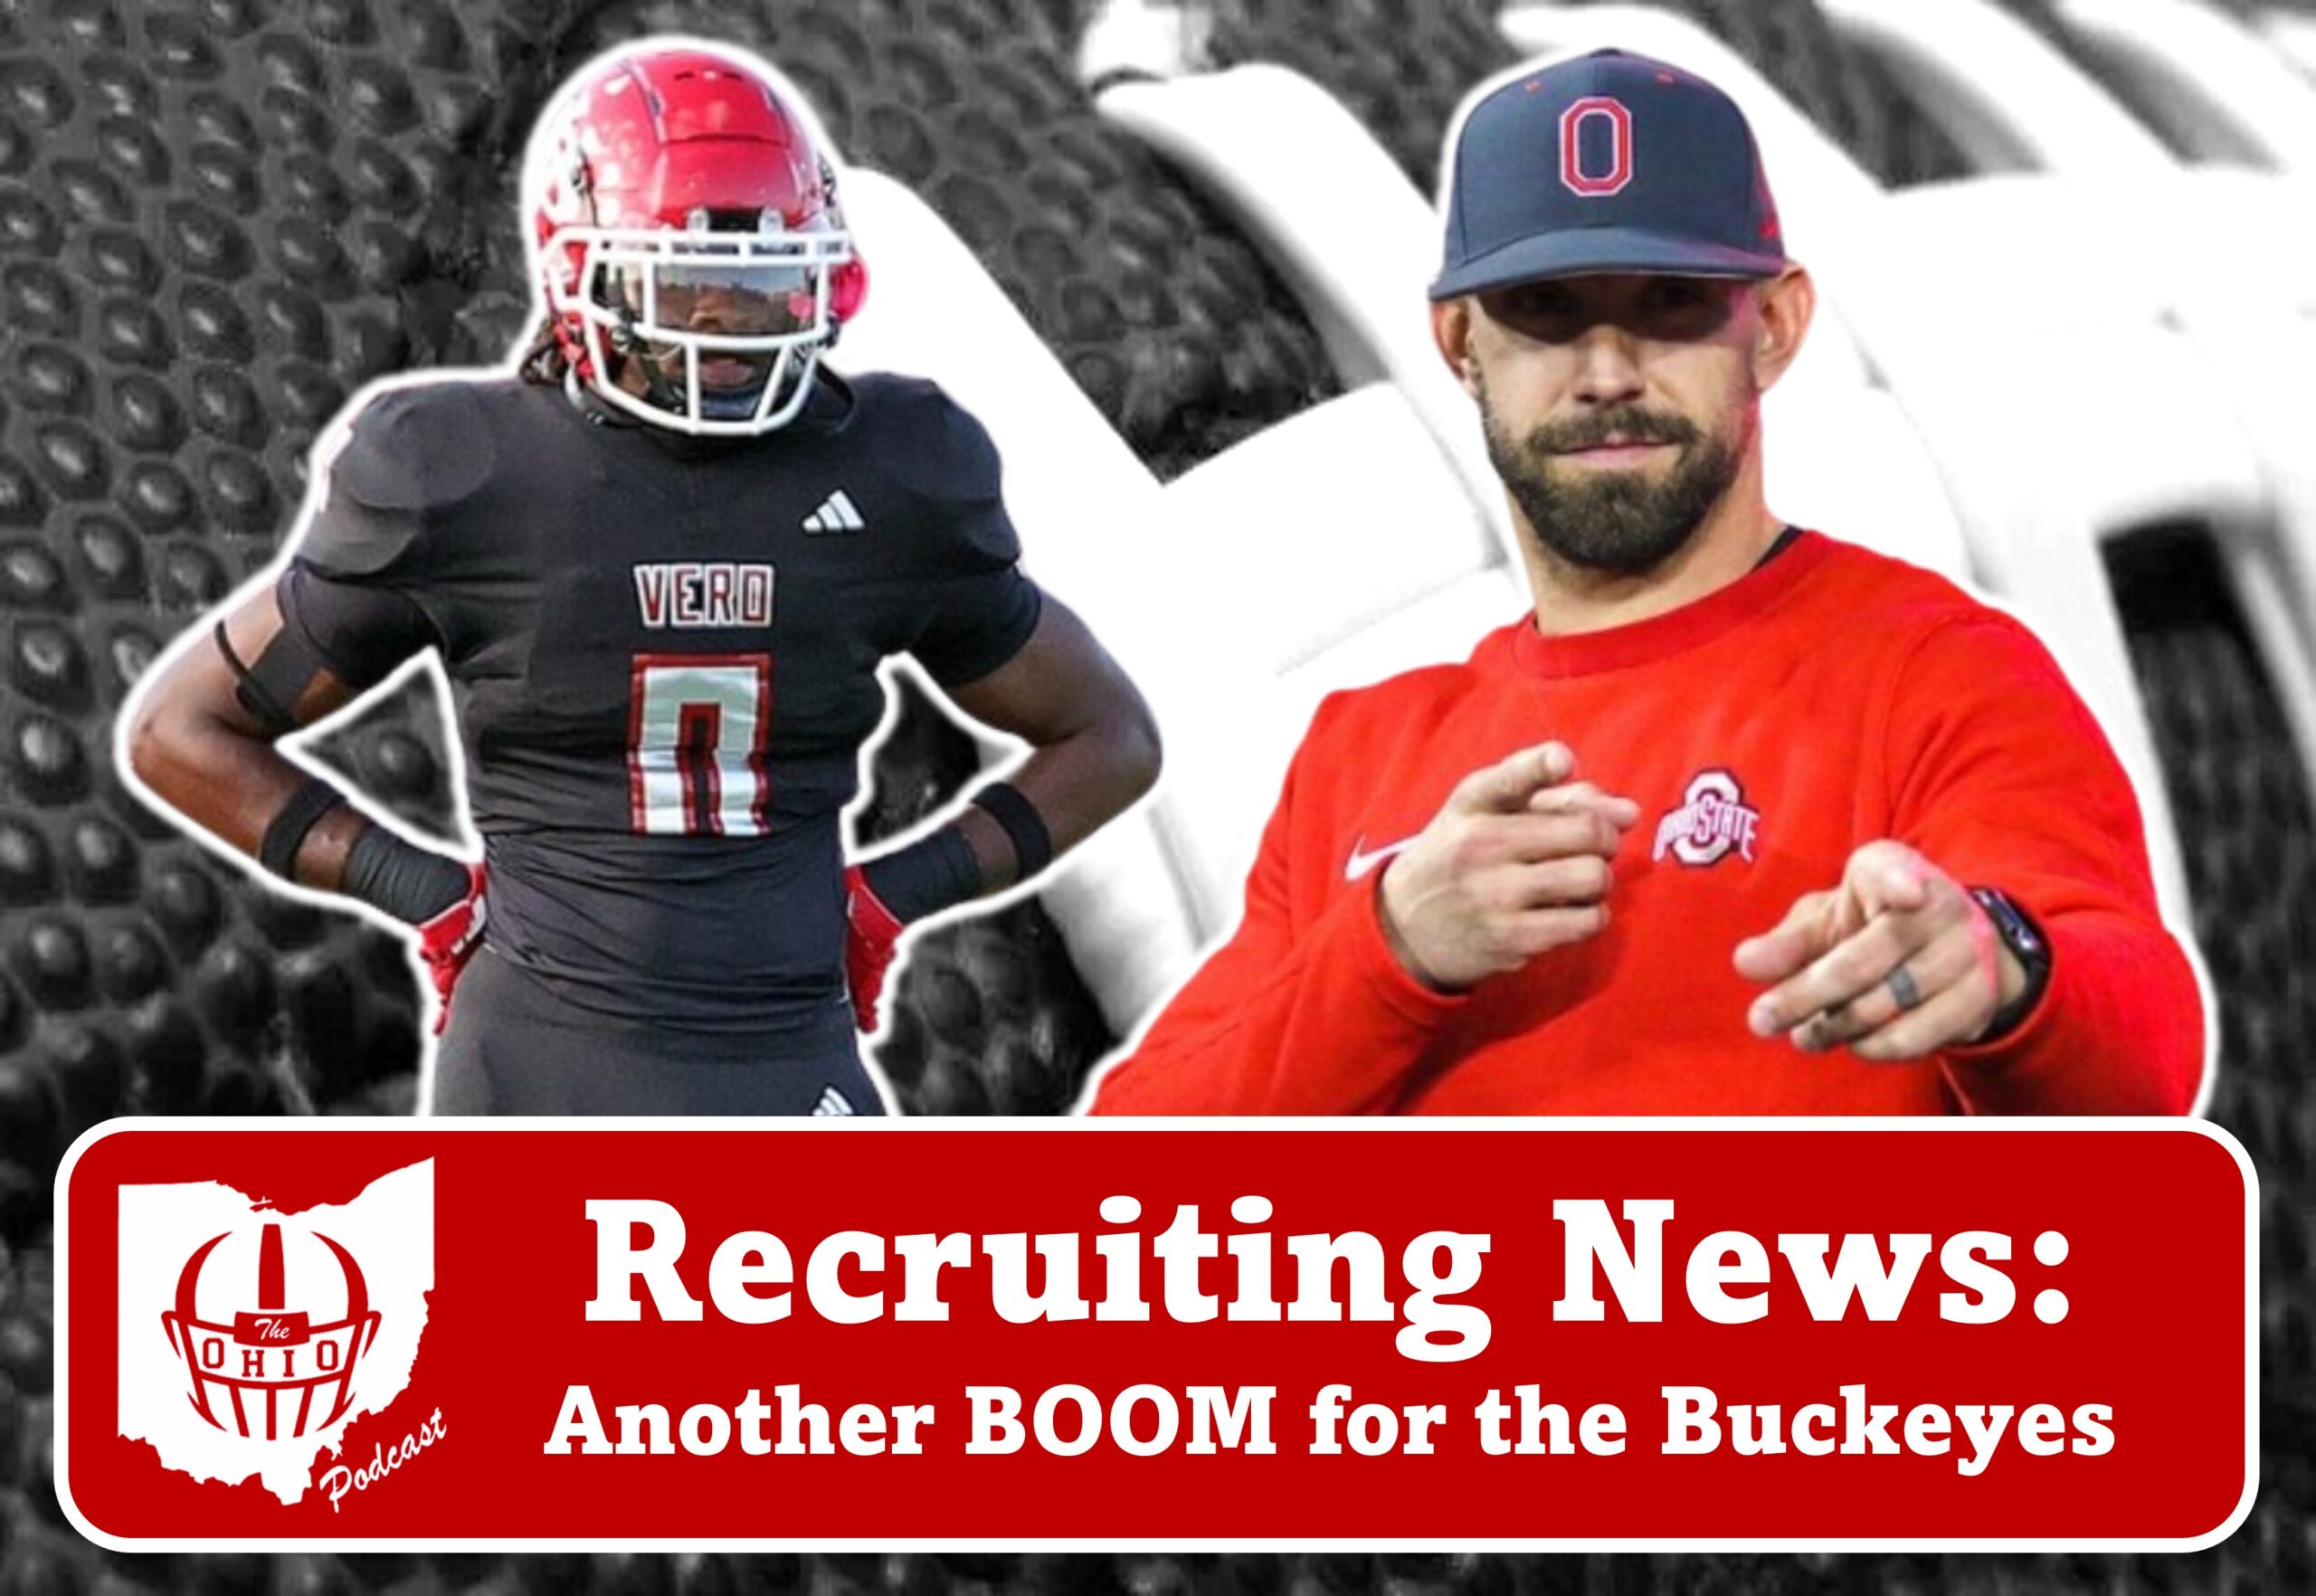 Ohio State Scores Big with Second Recruiting Commitment of the Week